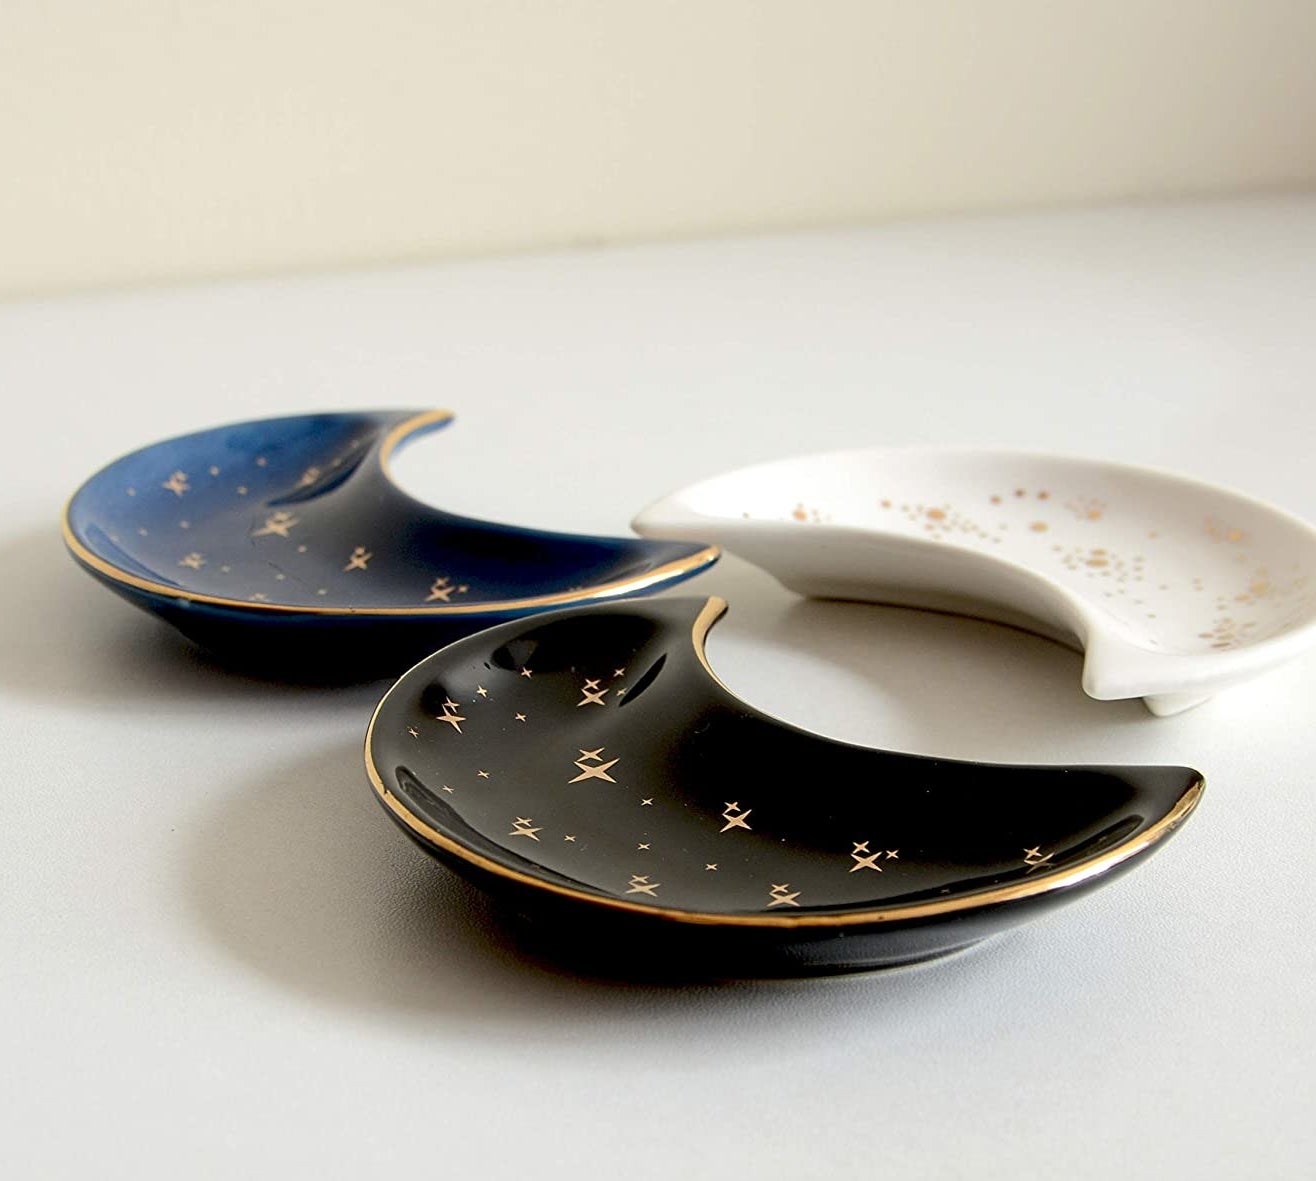 three moon-shaped trinket dishes on a white surface